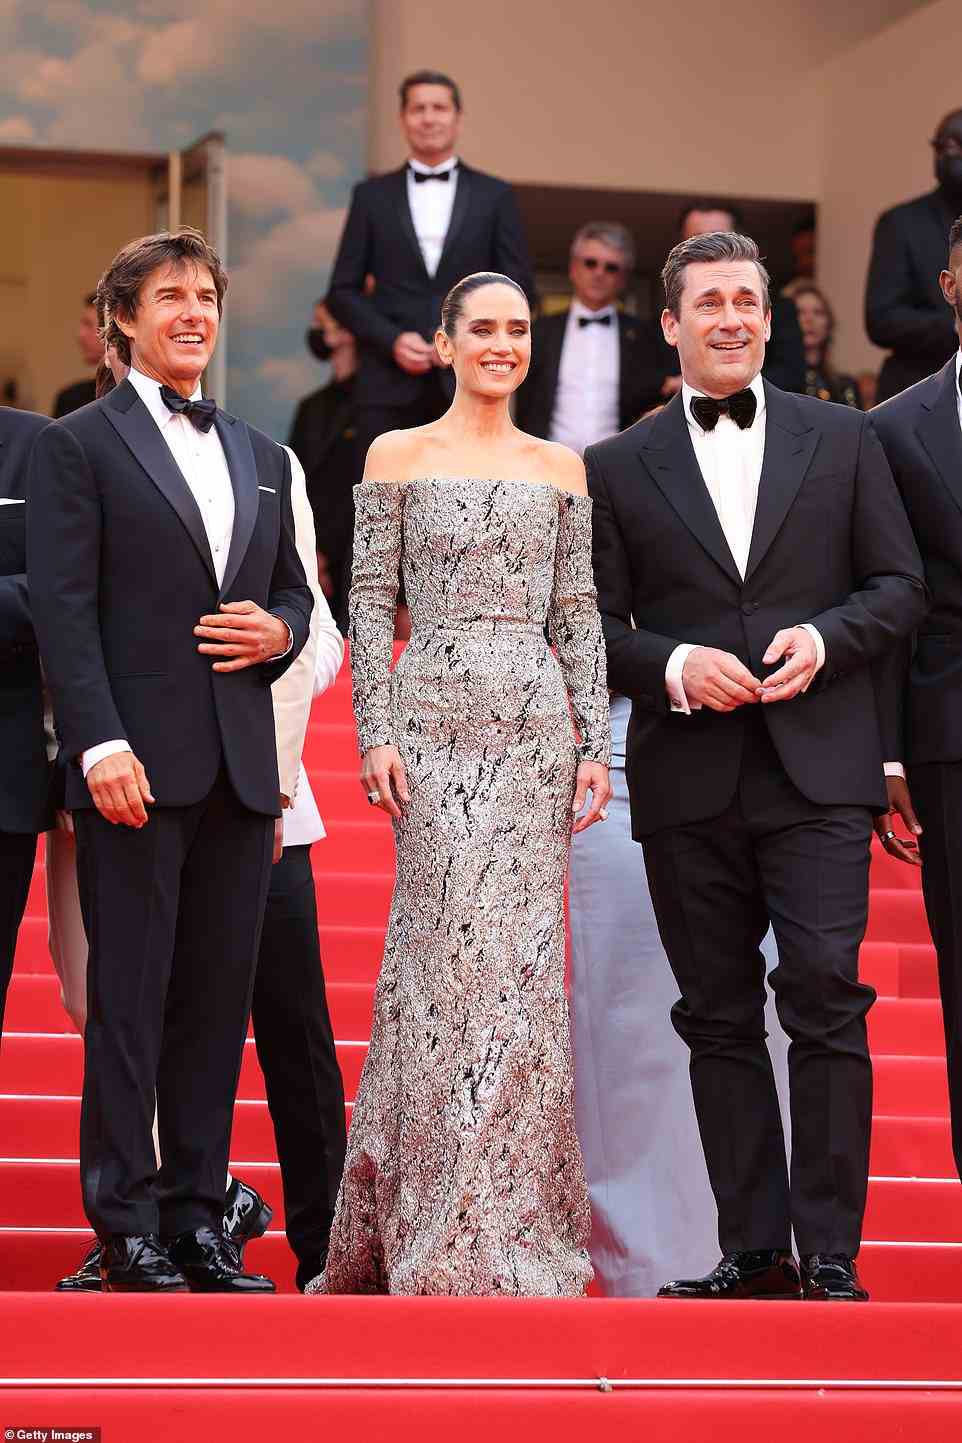 All smiles: Tom and Jennifer were also joined by Jon Hamm on the red carpet